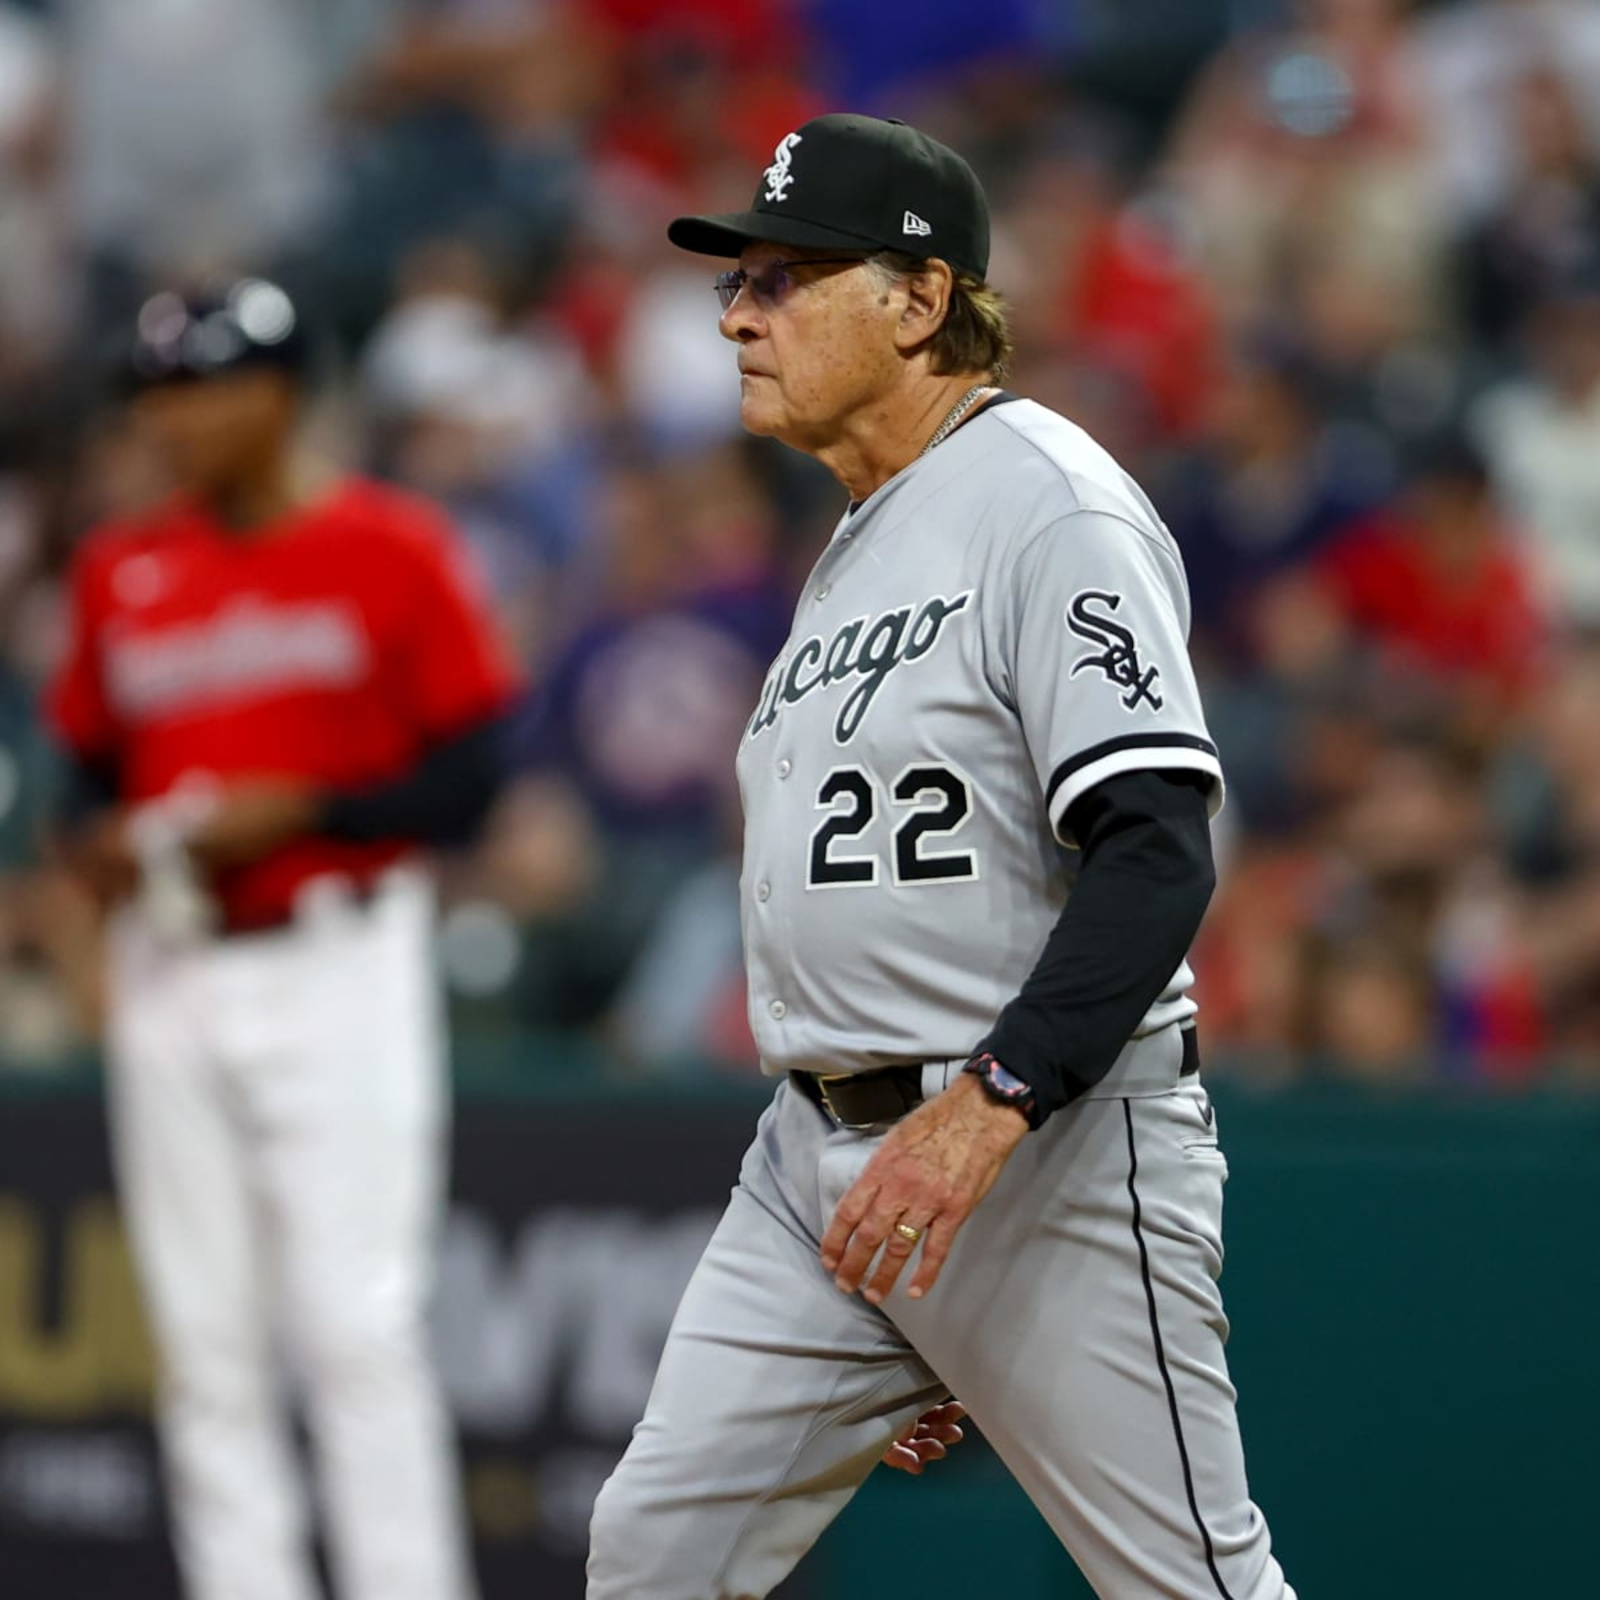 Tony La Russa's Yermín Mercedes 3–0 home run criticism: White Sox manager  is out of line.